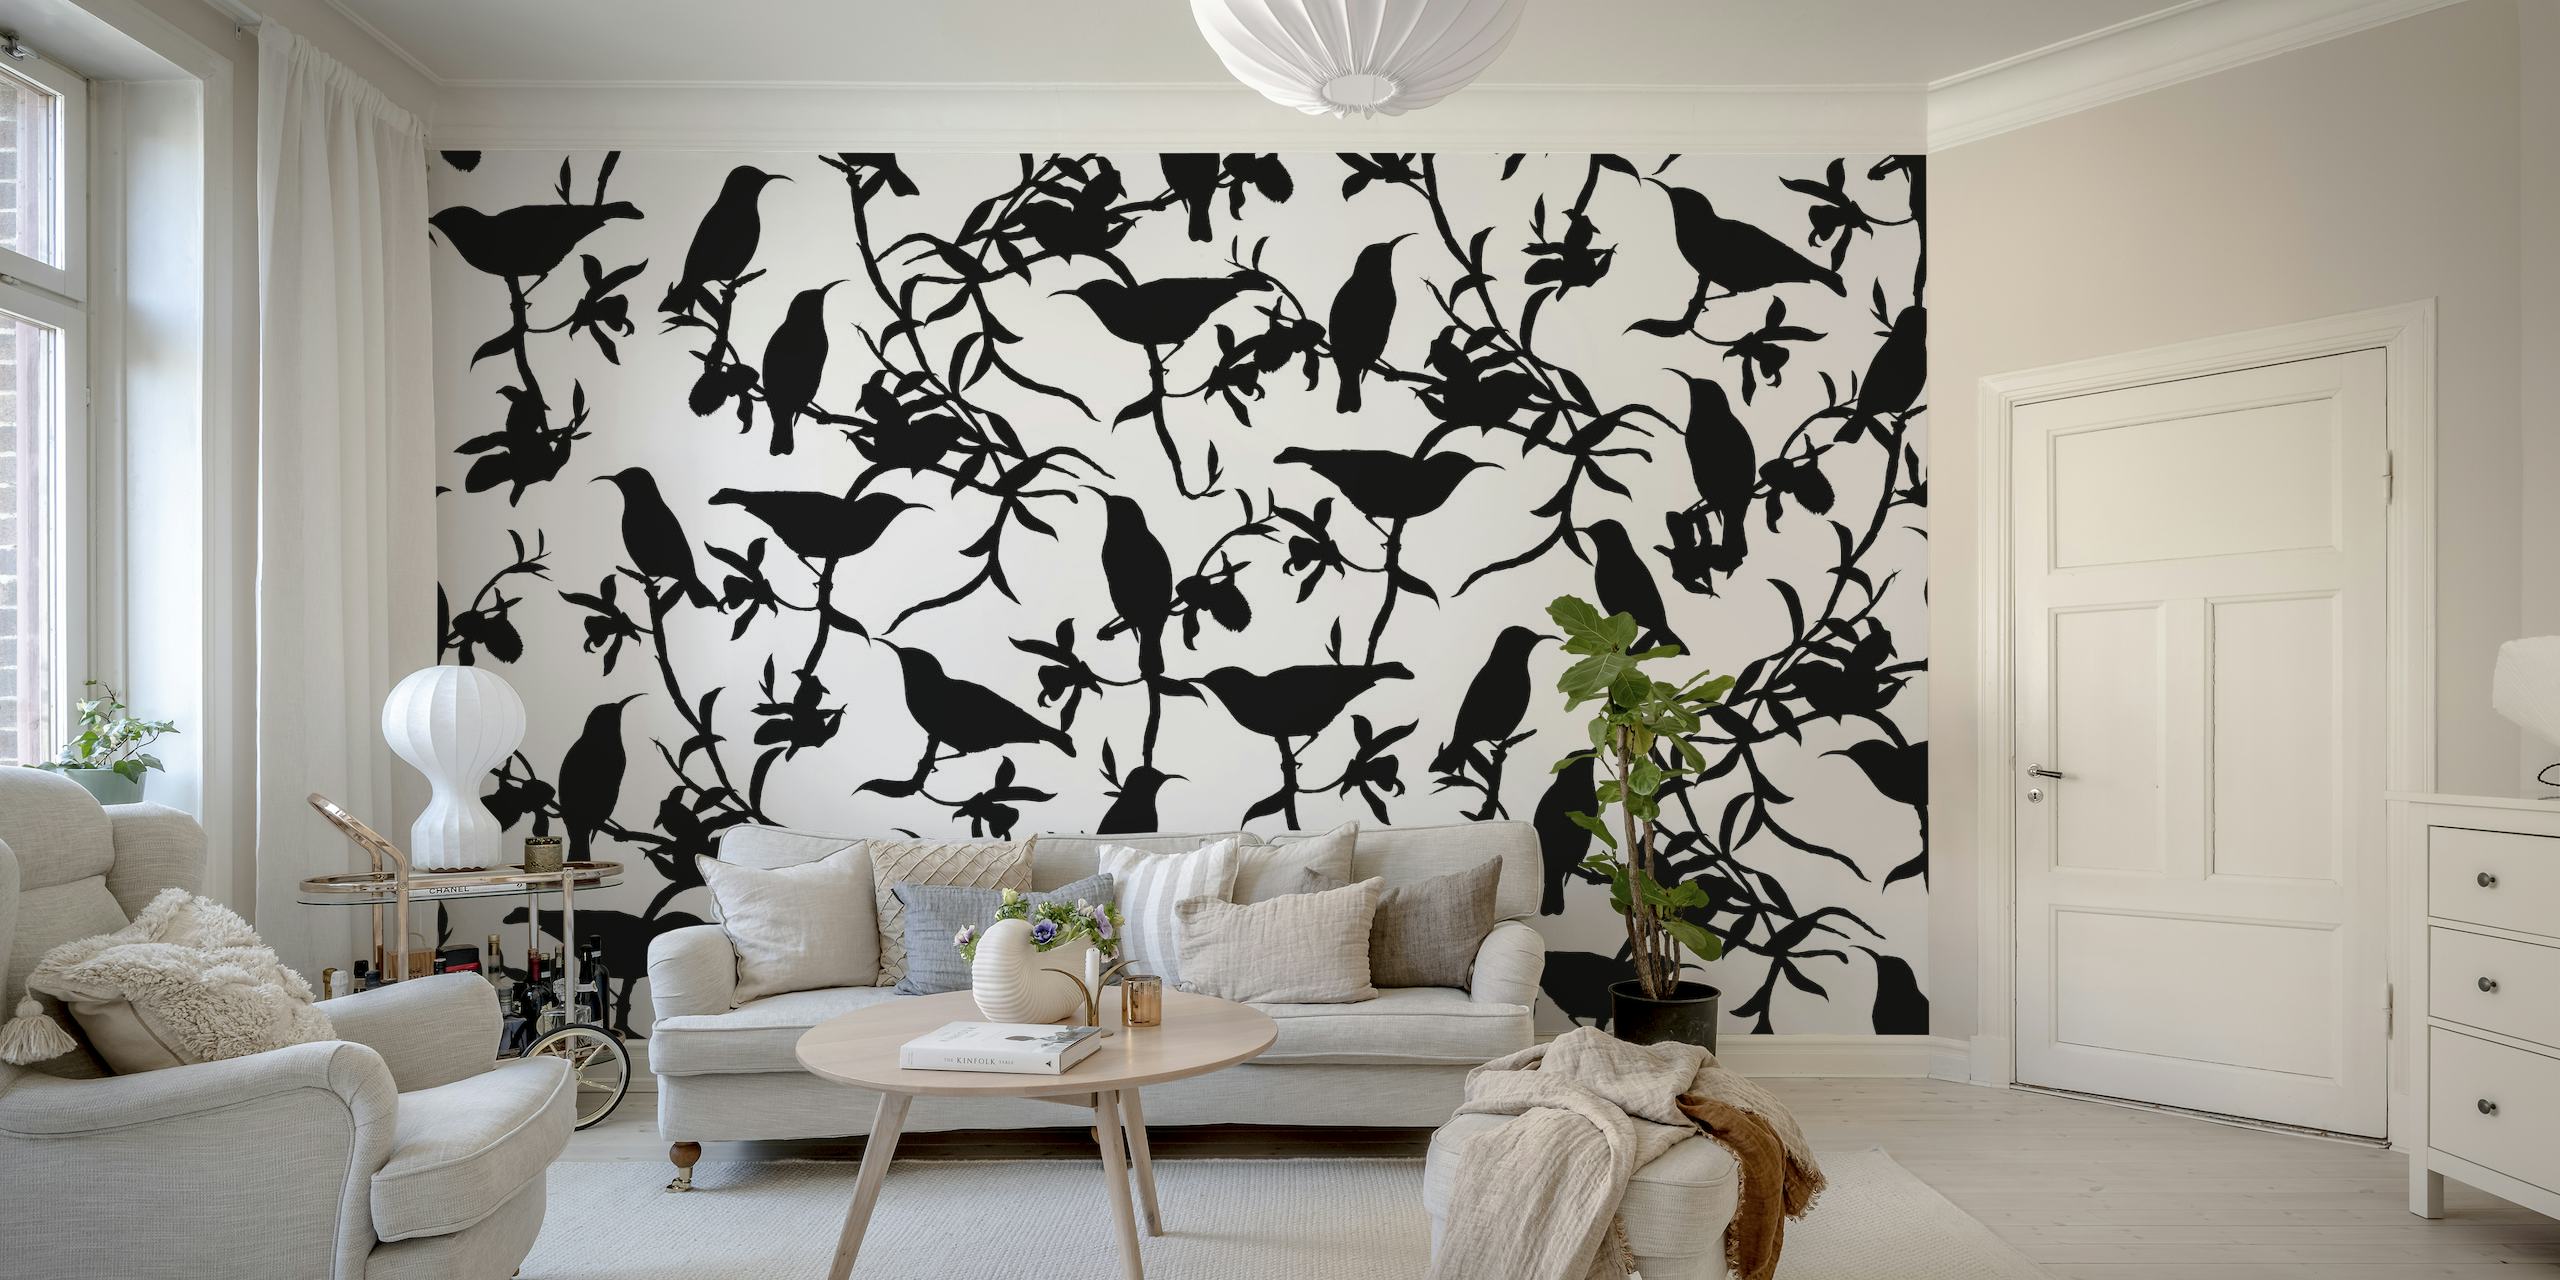 Black and white hummingbird chinoiserie pattern wall mural at Happywall